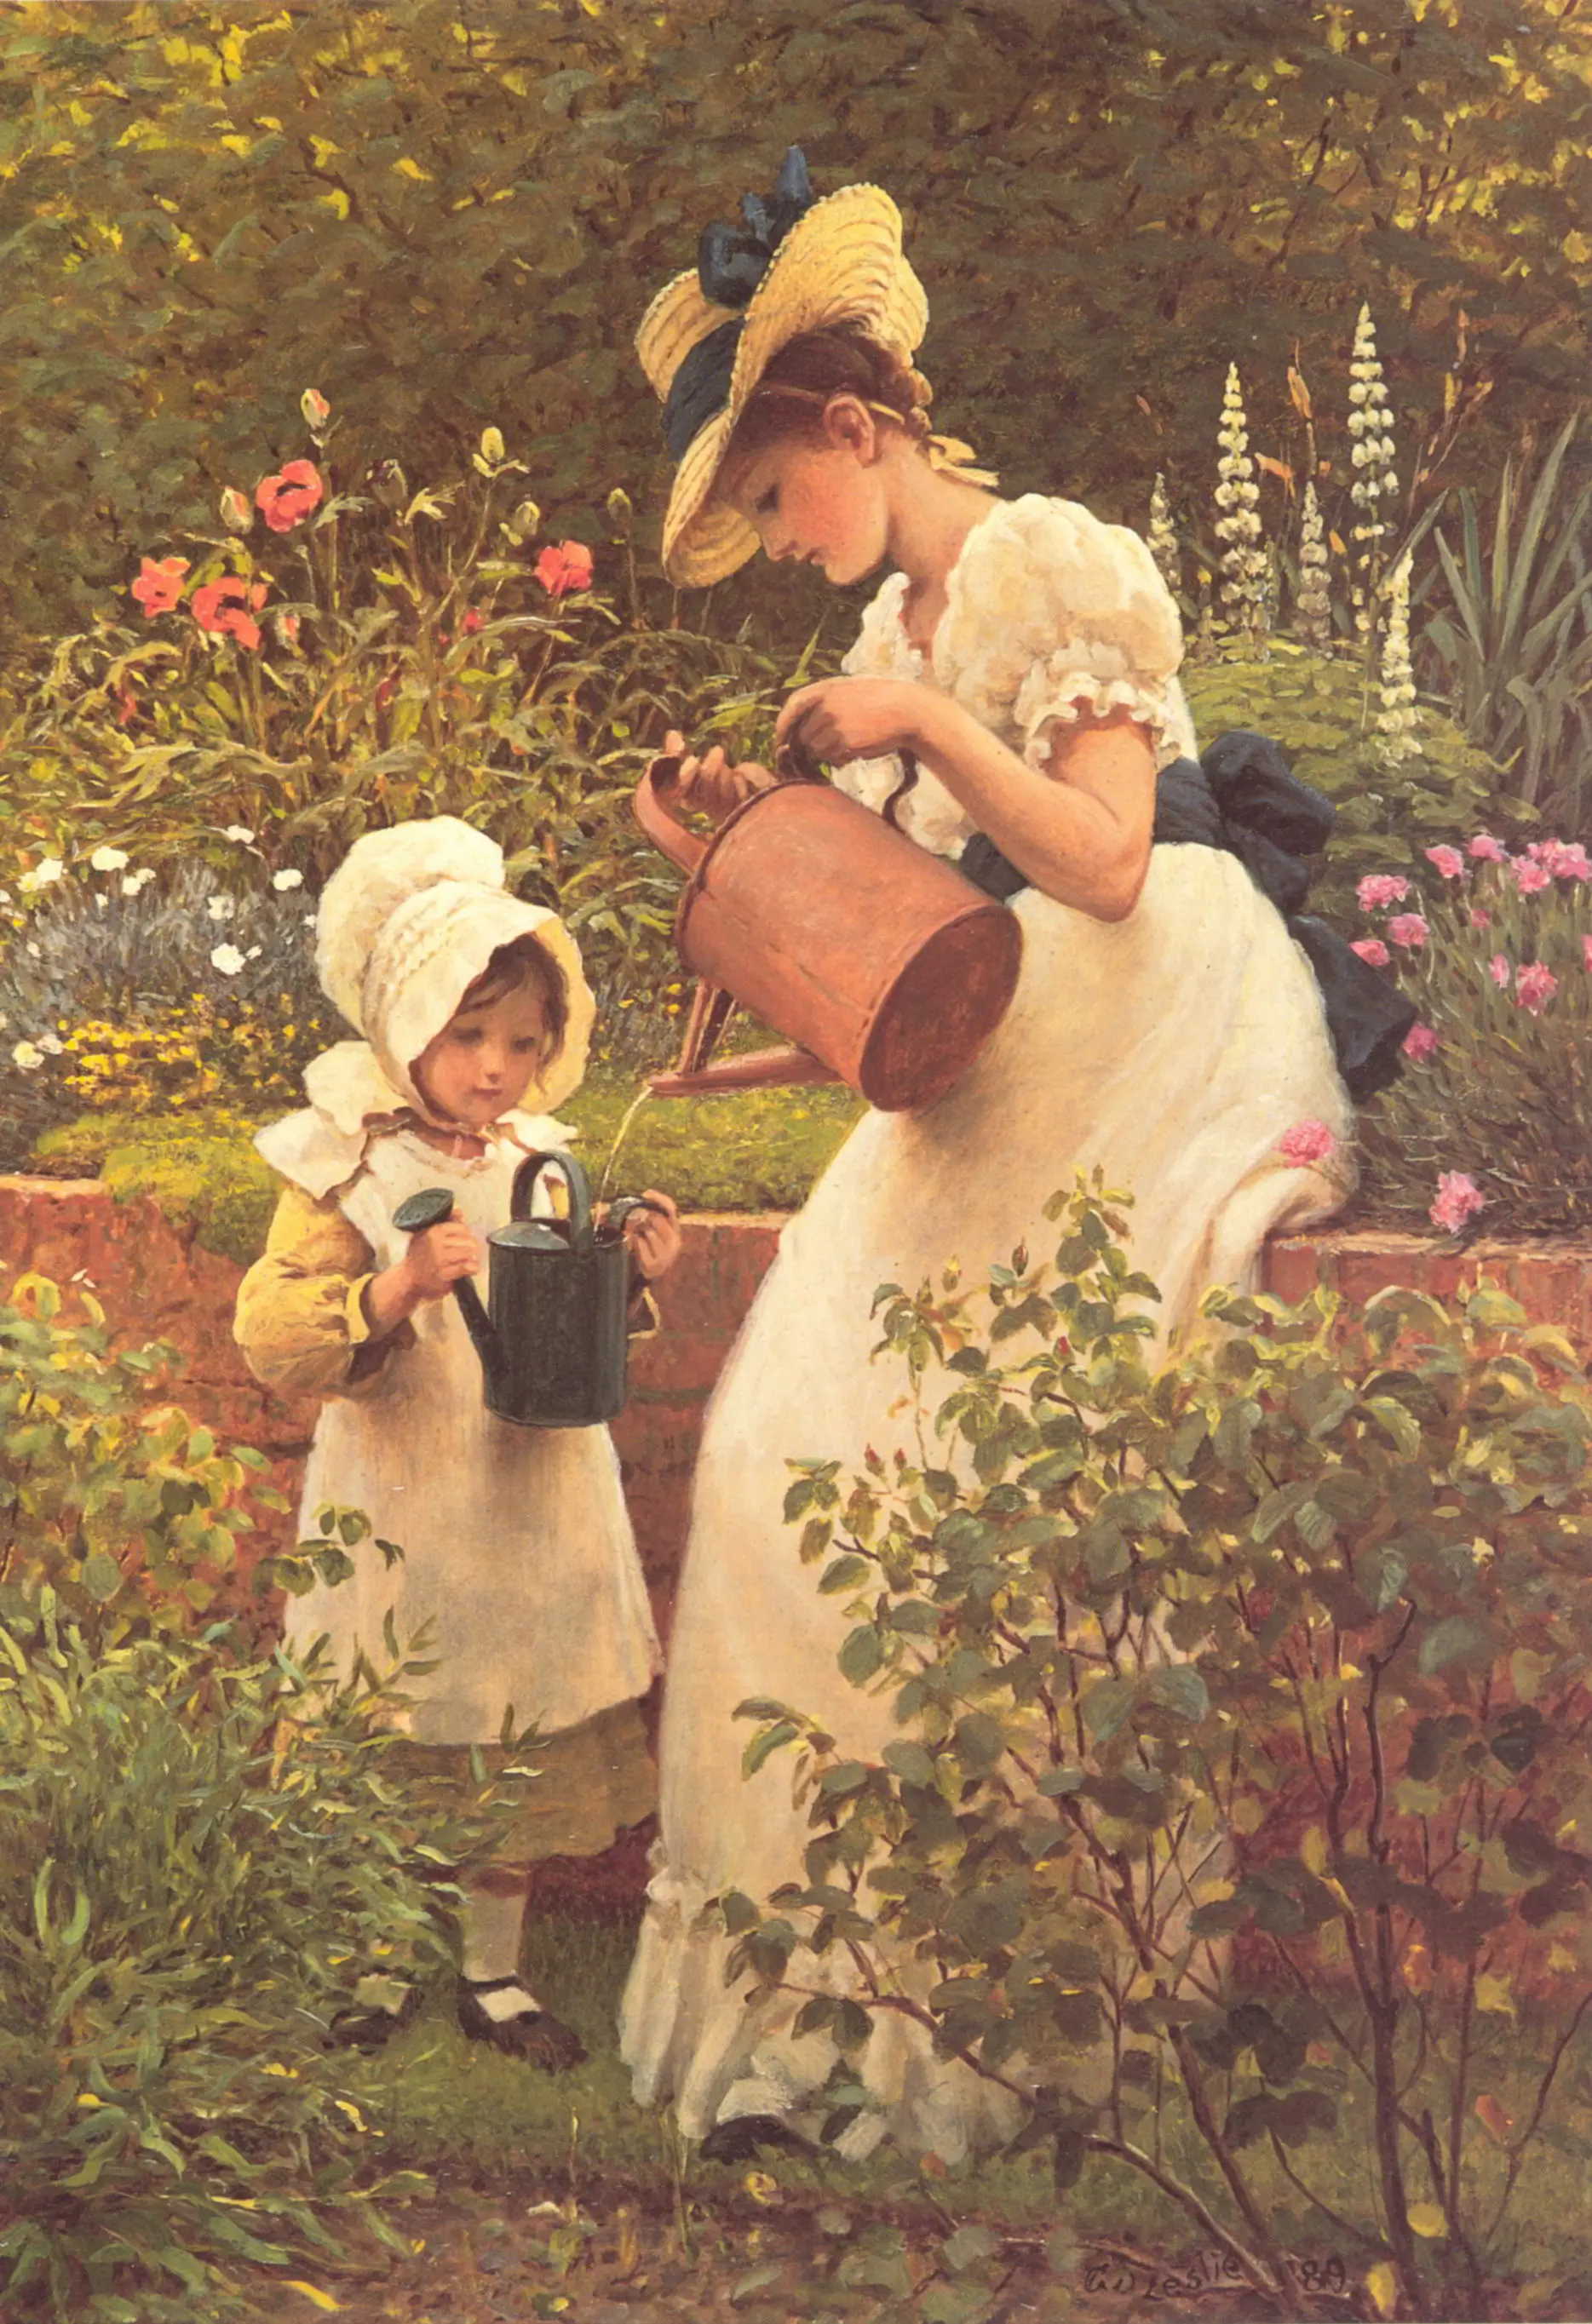 

The Young Gardener by George Dunlop R.A. Leslie Oil Paintings Replica on Canvas for Living Room Figure Art Home Decor Handmade